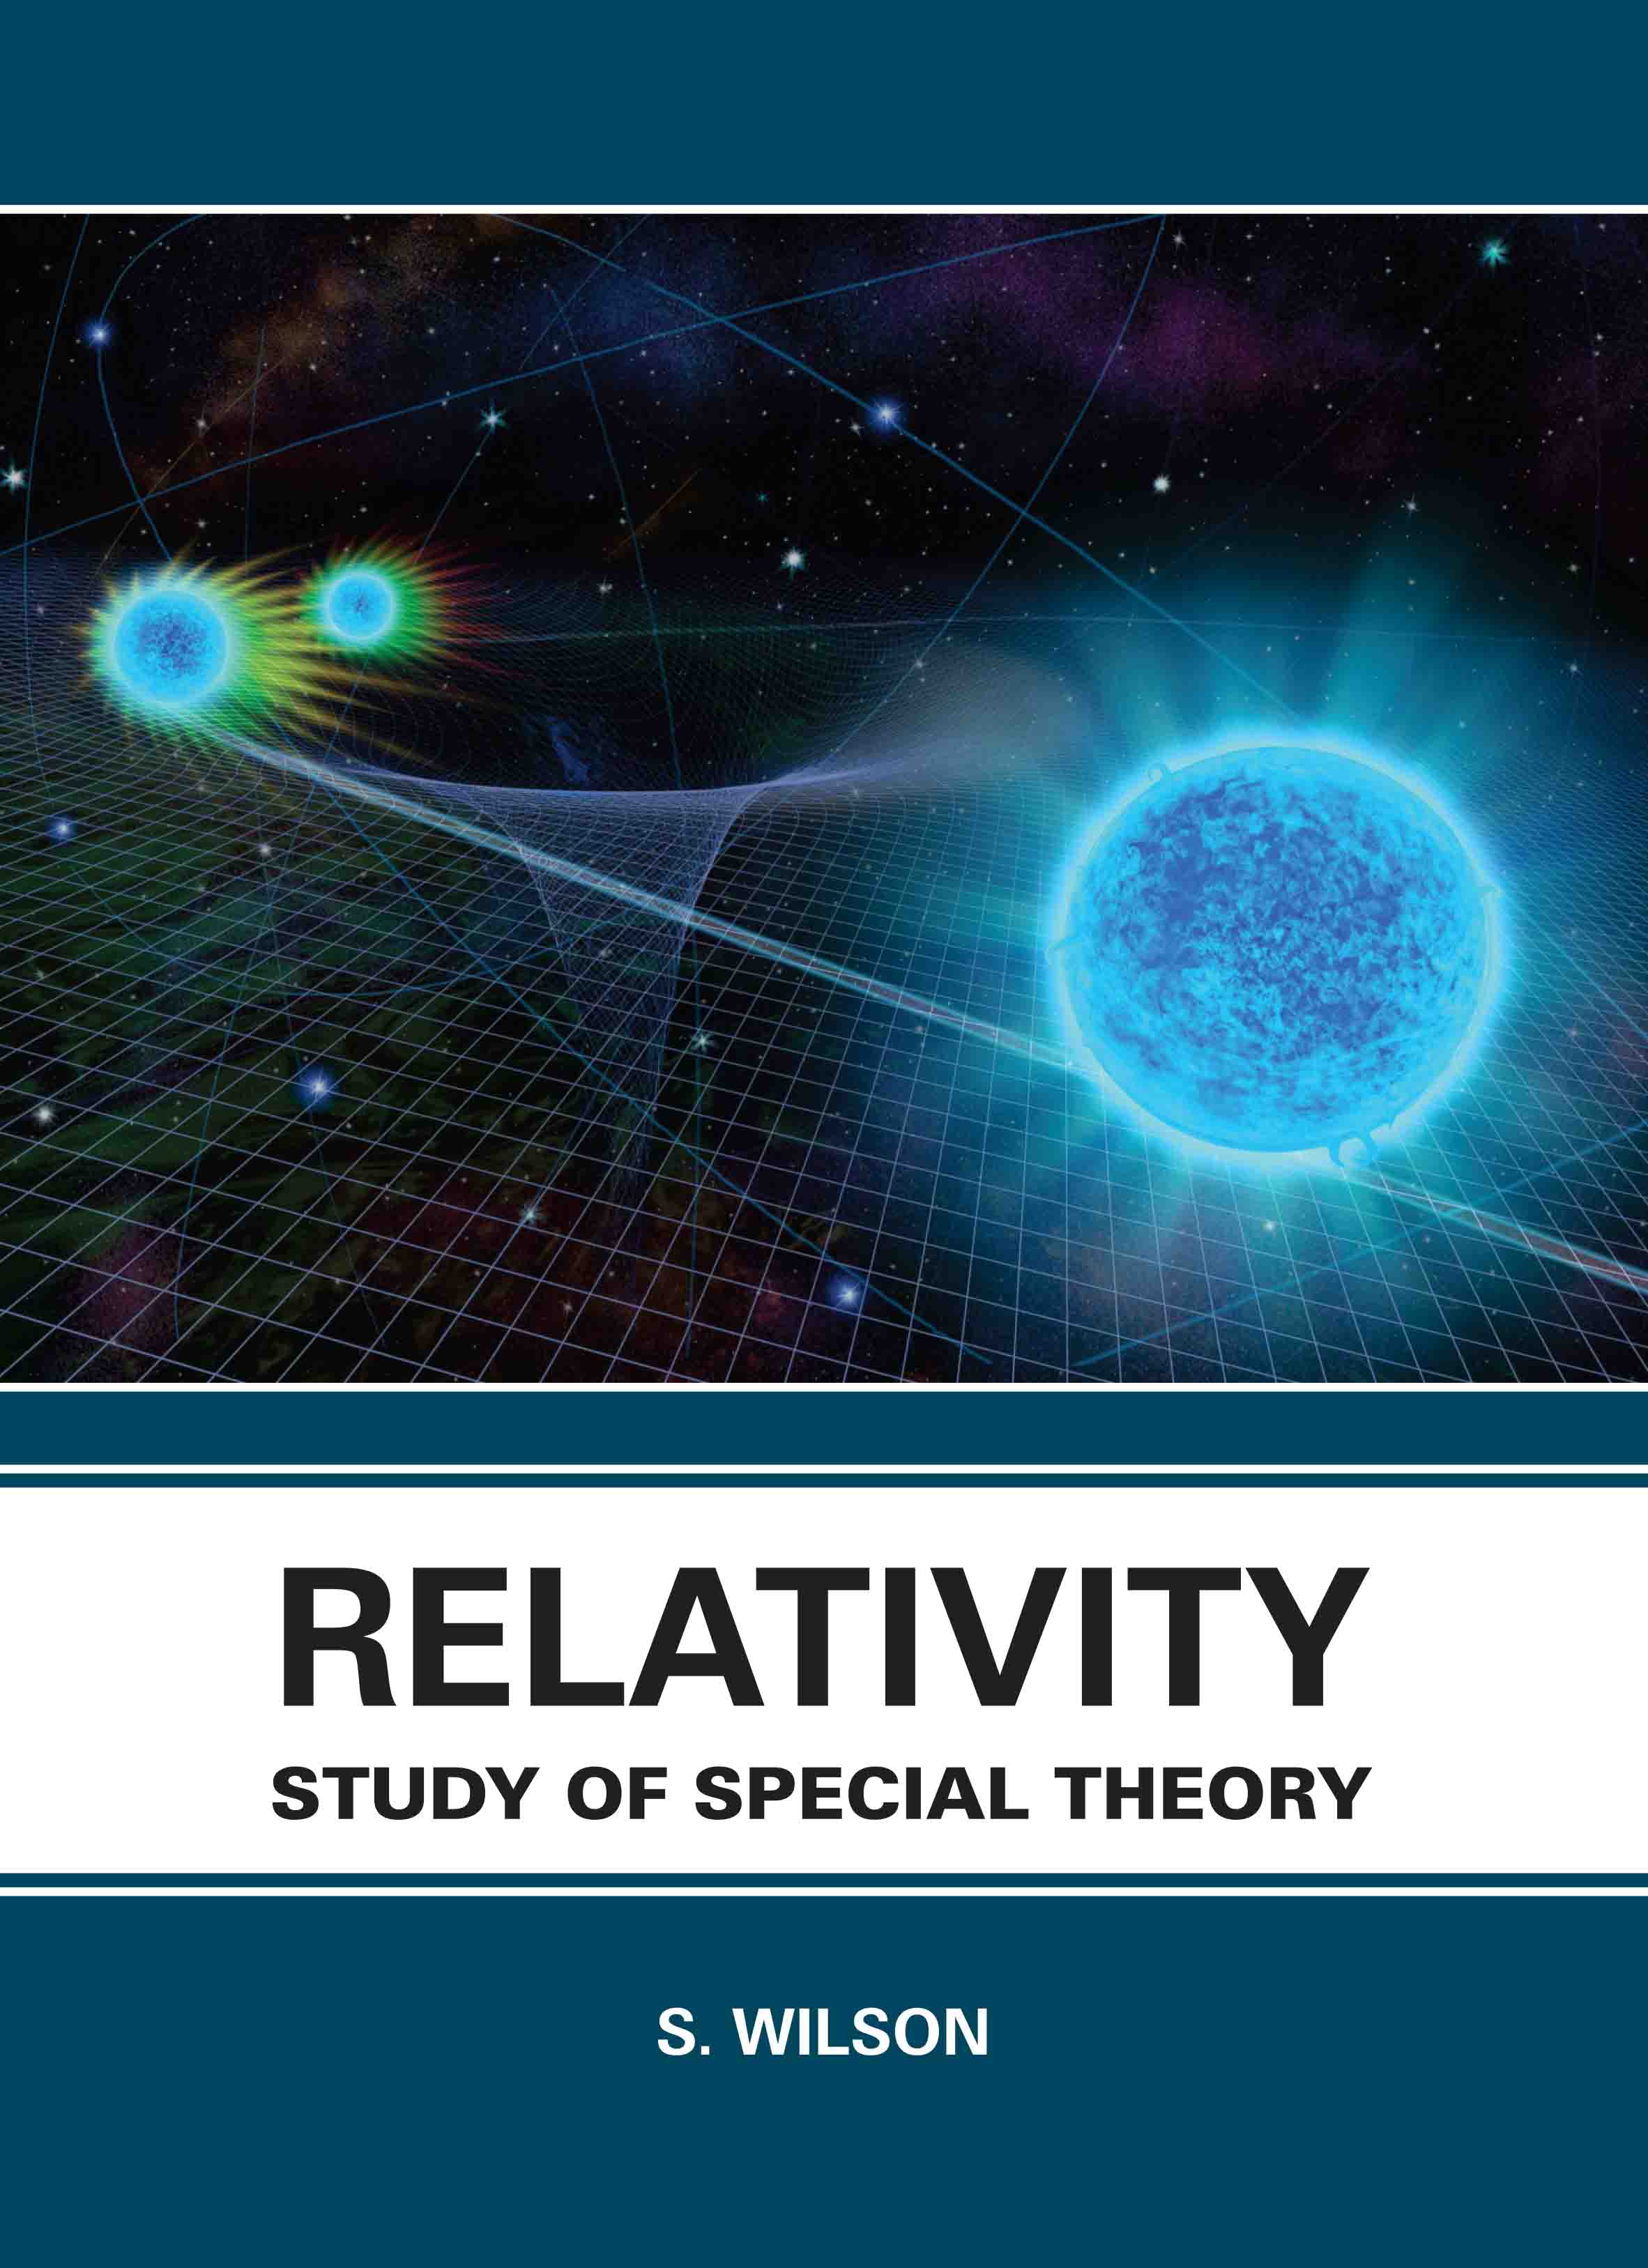 Relativity: Study of Special Theory